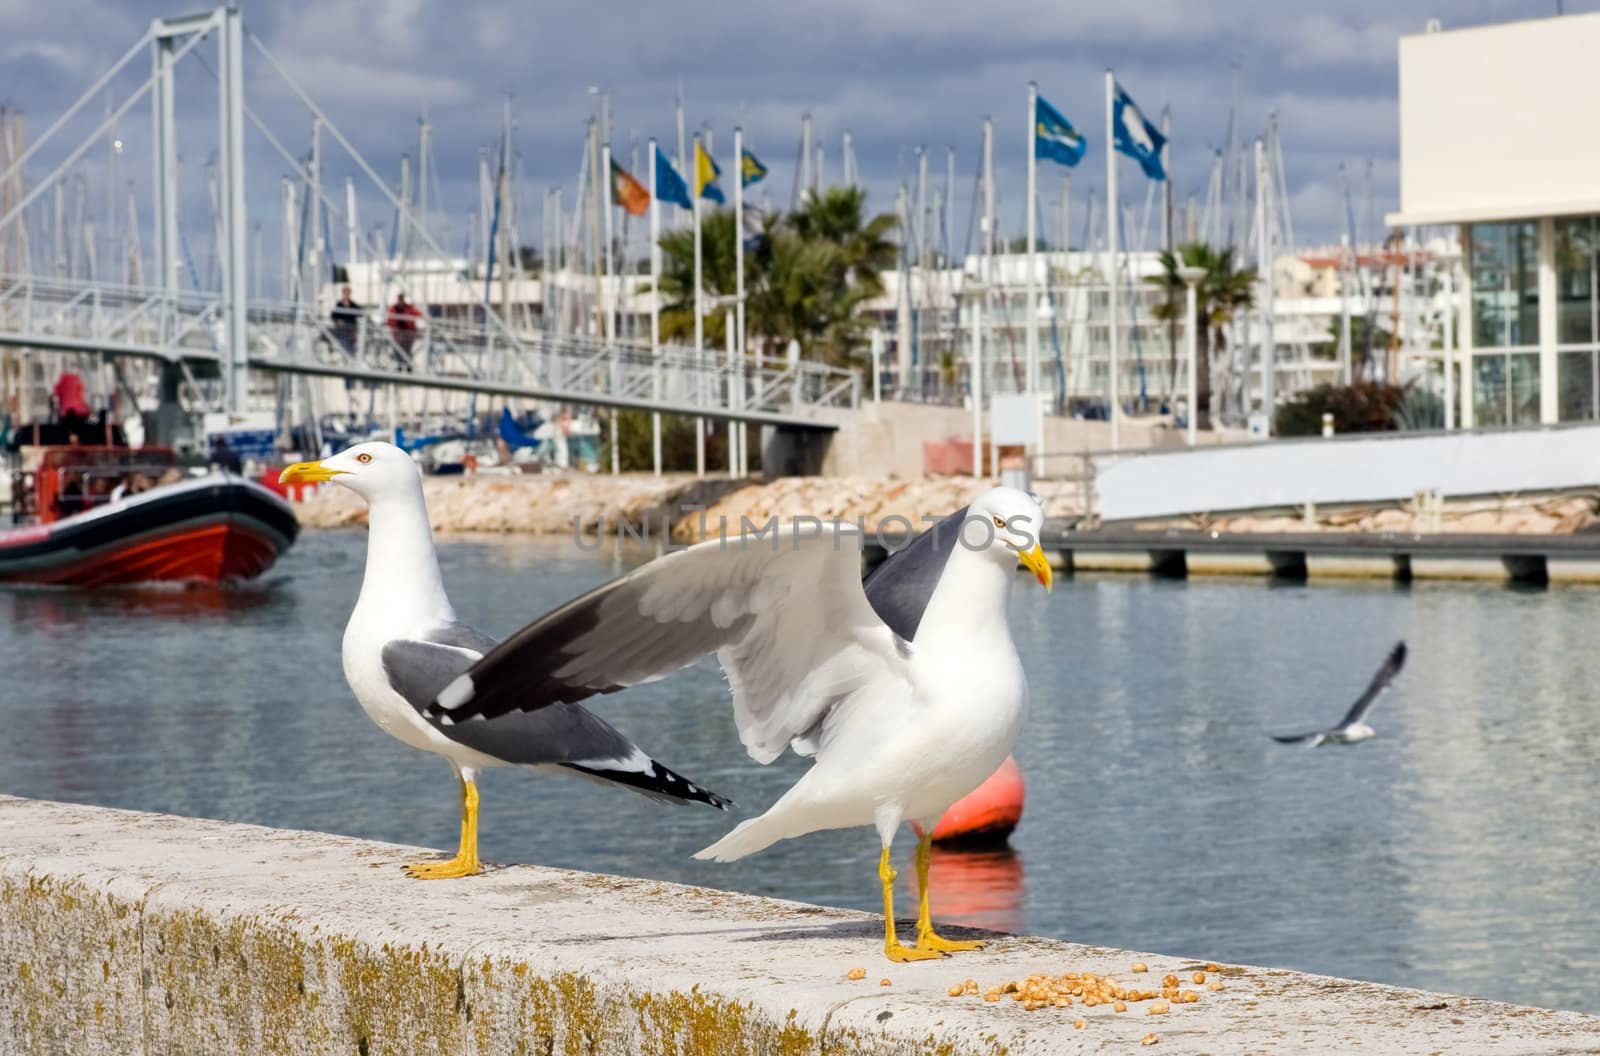 2 Seagulls in the foreground, guarding the entrance to a marina.